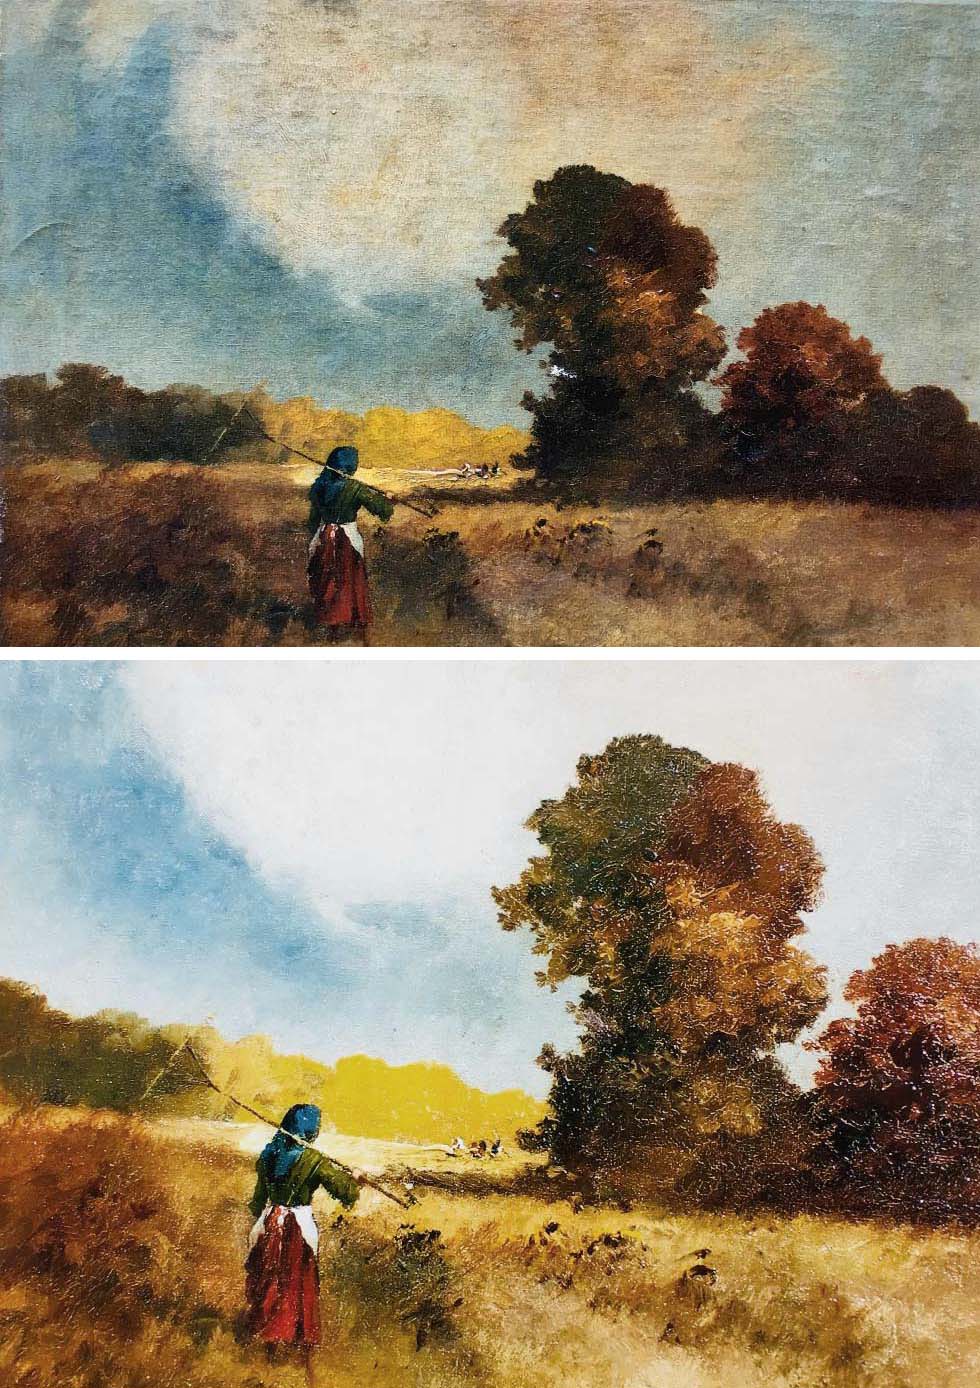 A painting of a woman fishing in the middle of a field.